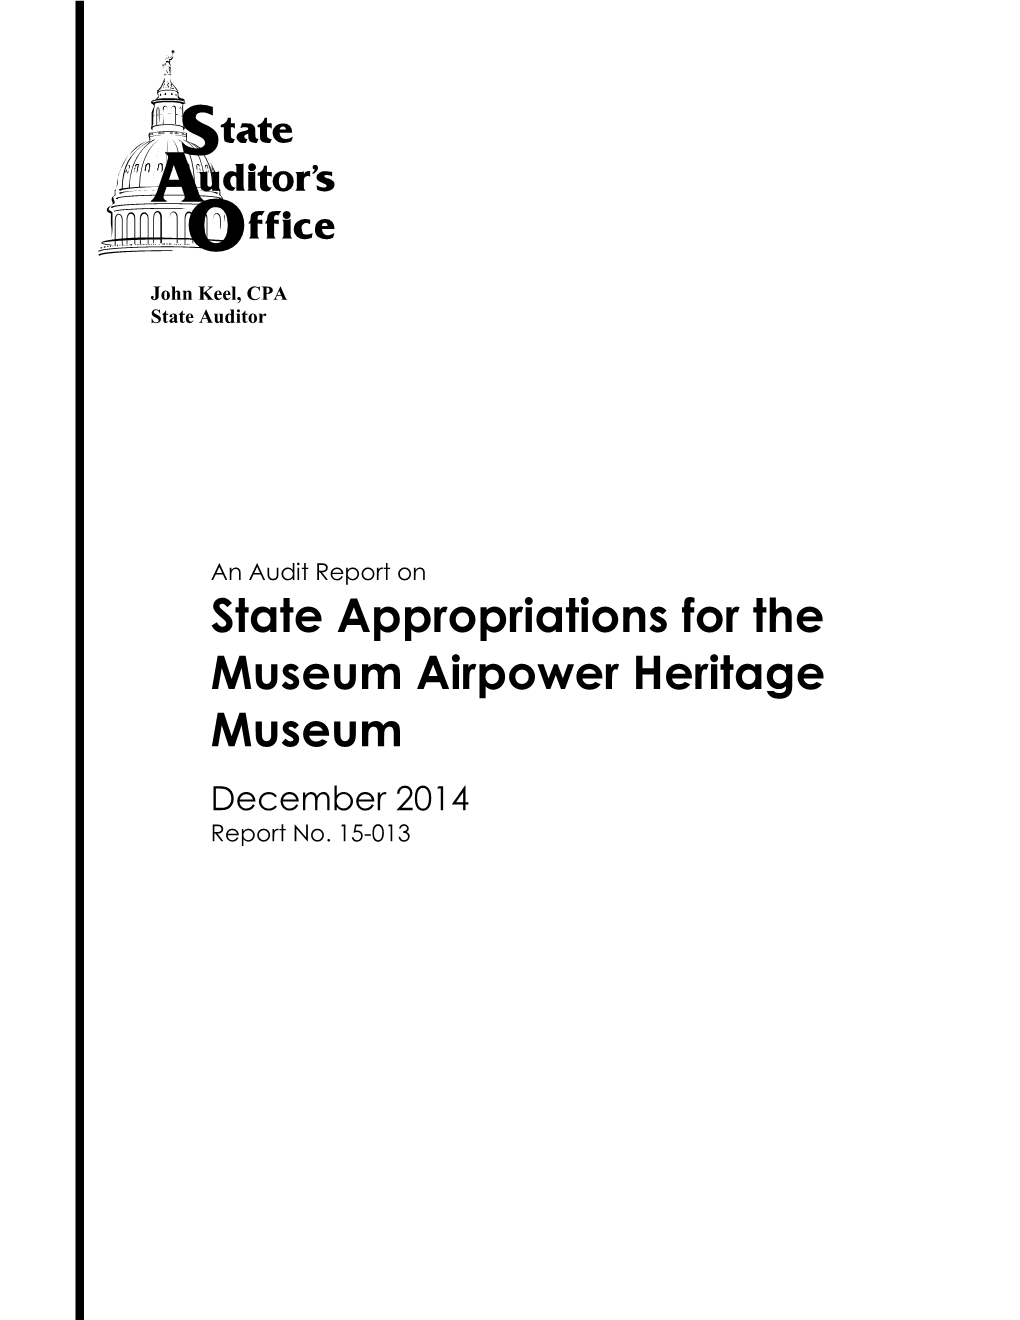 An Audit Report on State Appropriations for the Museum Airpower Heritage Museum December 2014 Report No